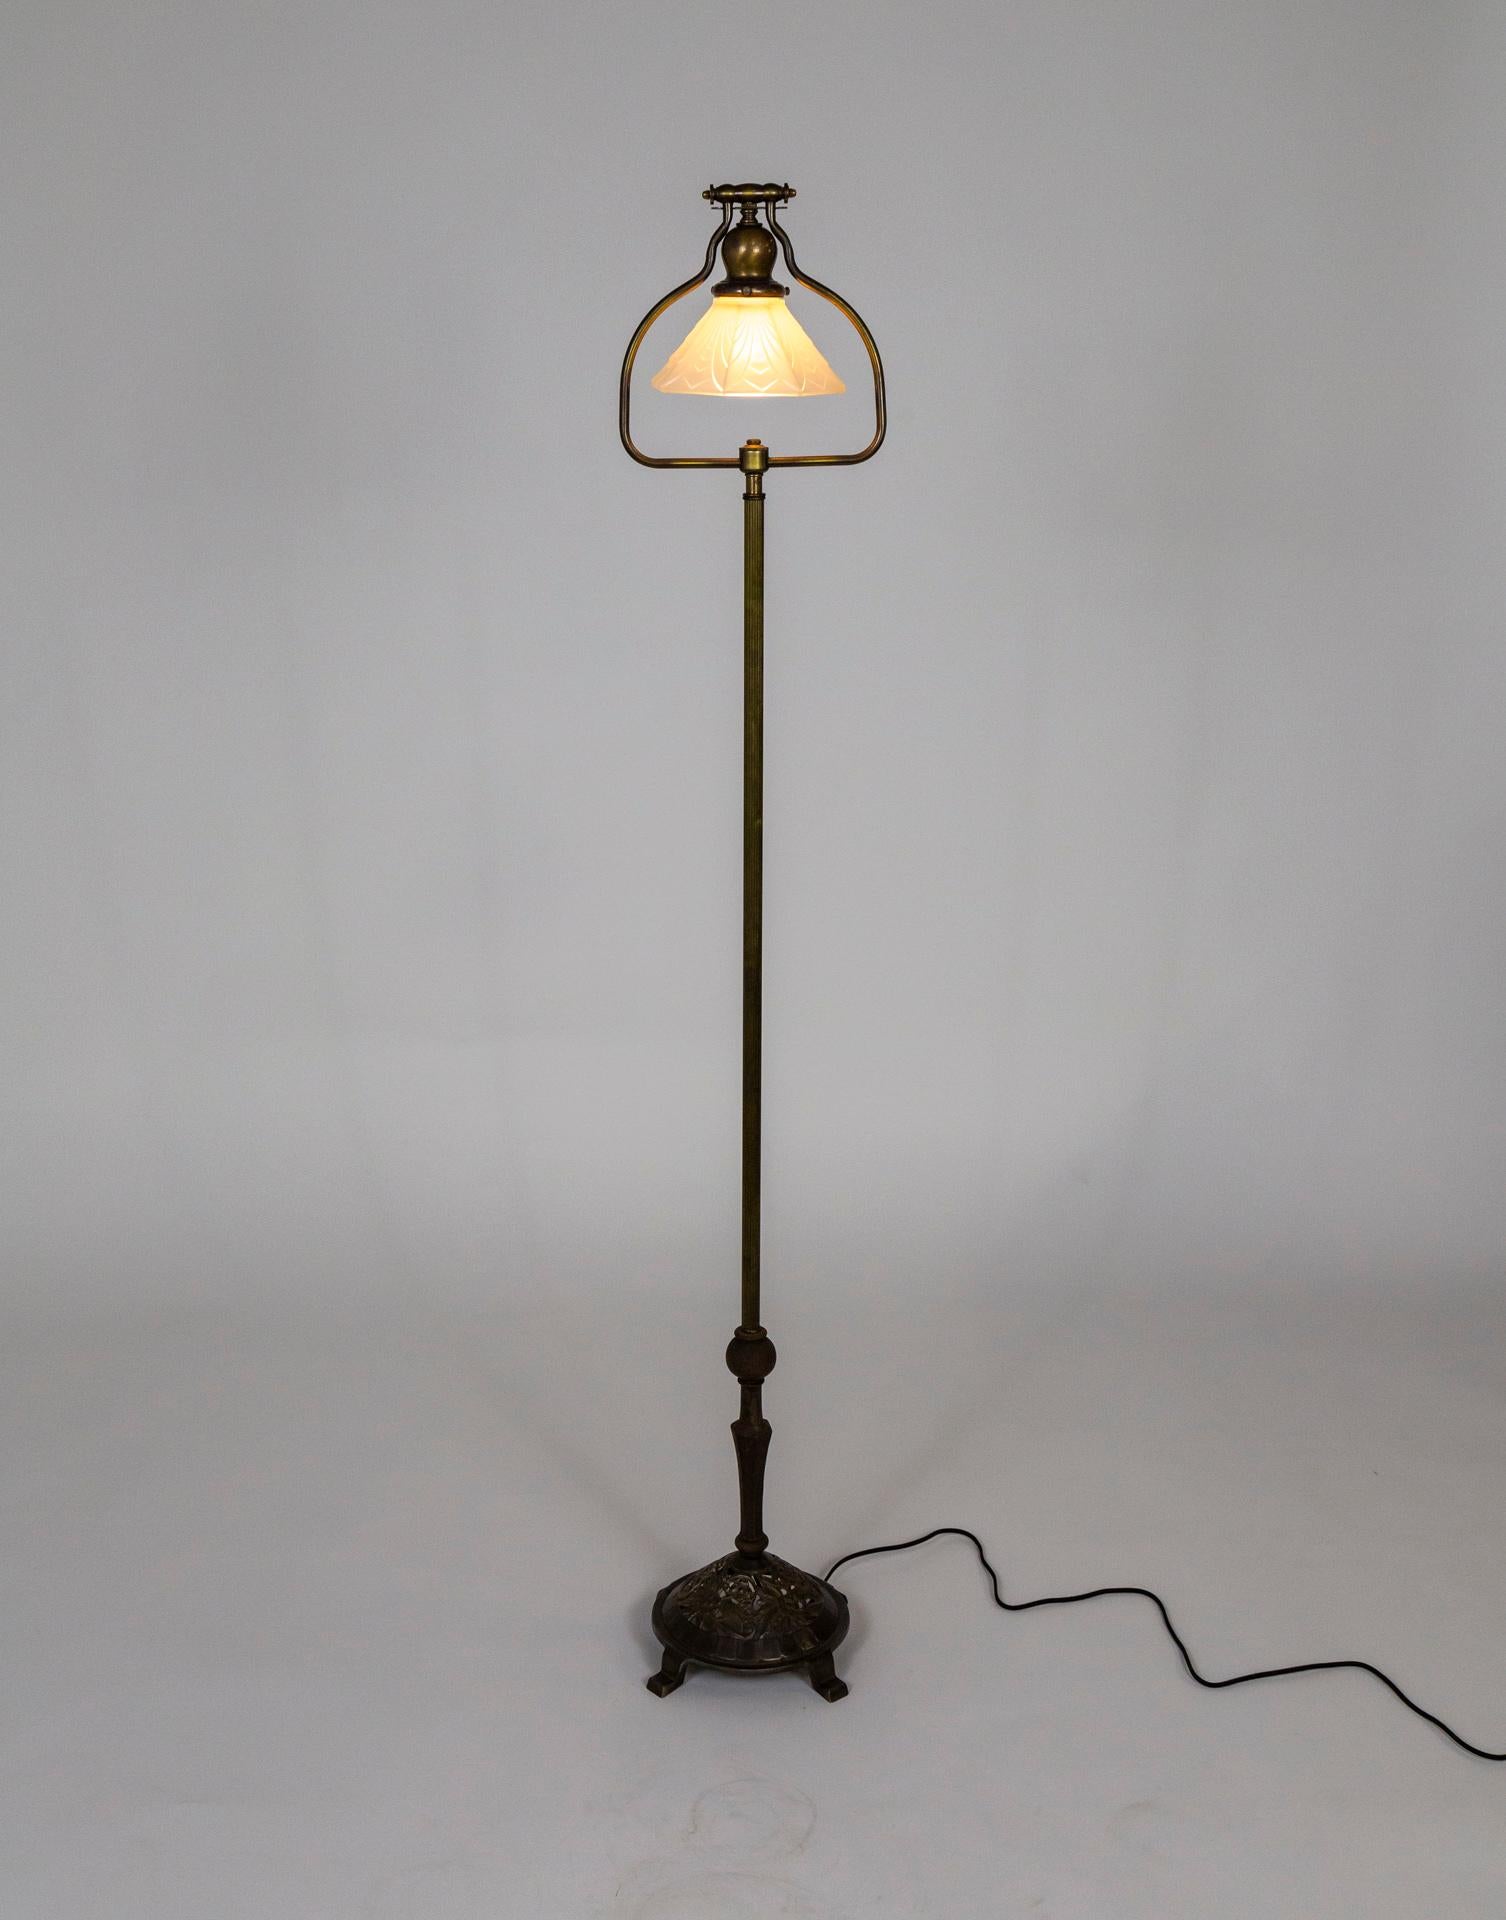 Craftsman Harp Floor Lamp w/ Floral Base & Molded Glass Shade In Good Condition For Sale In San Francisco, CA